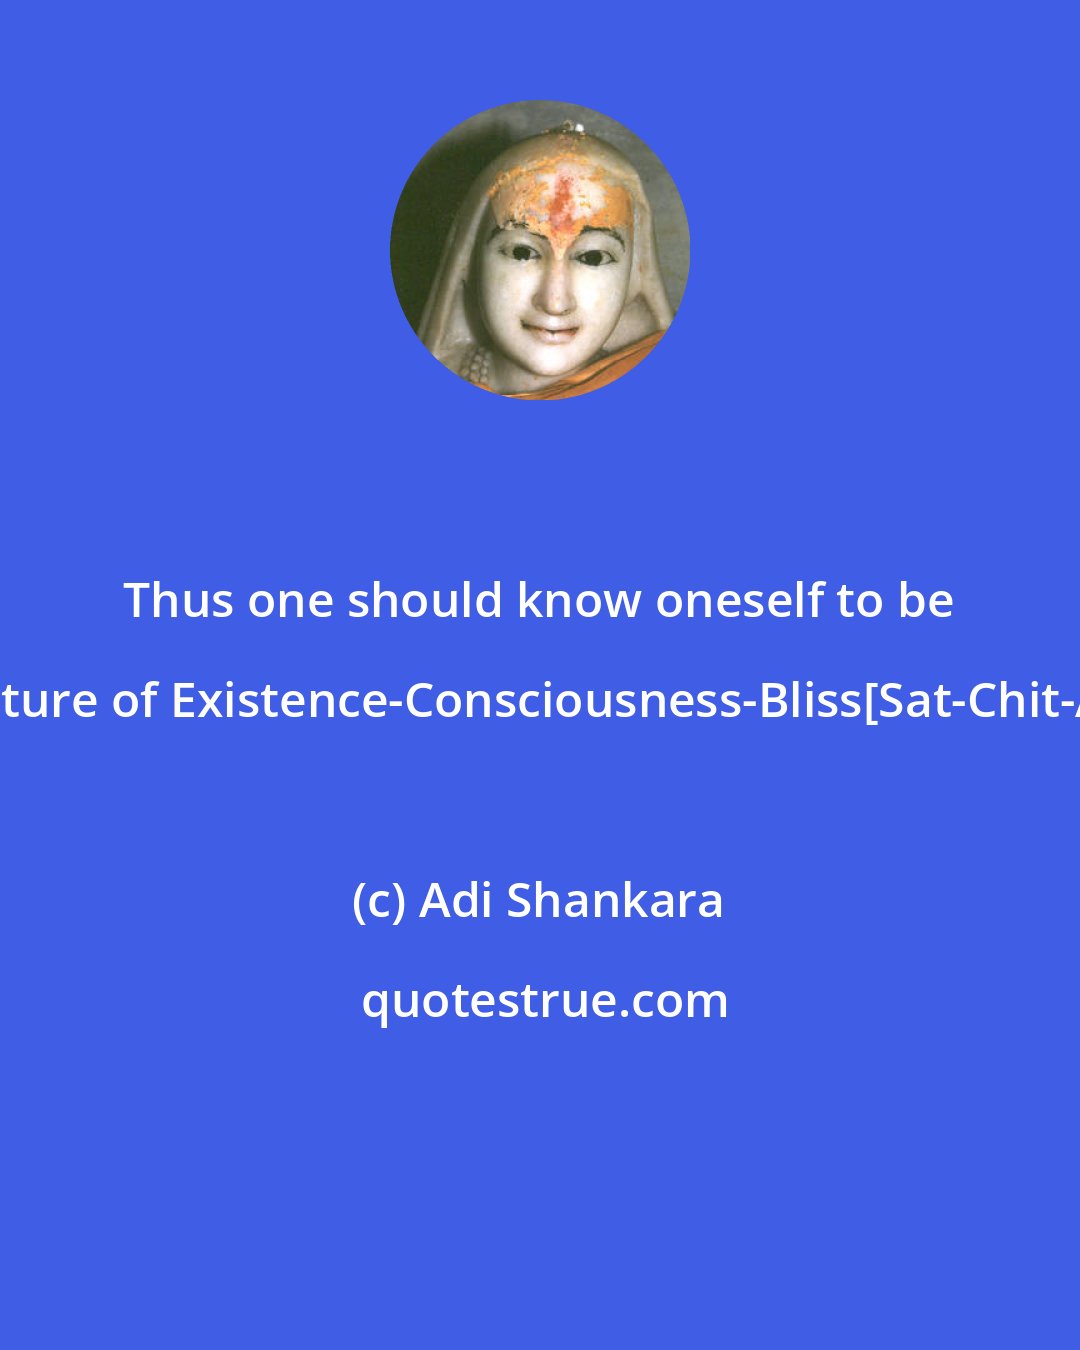 Adi Shankara: Thus one should know oneself to be of the nature of Existence-Consciousness-Bliss[Sat-Chit-Ananda].